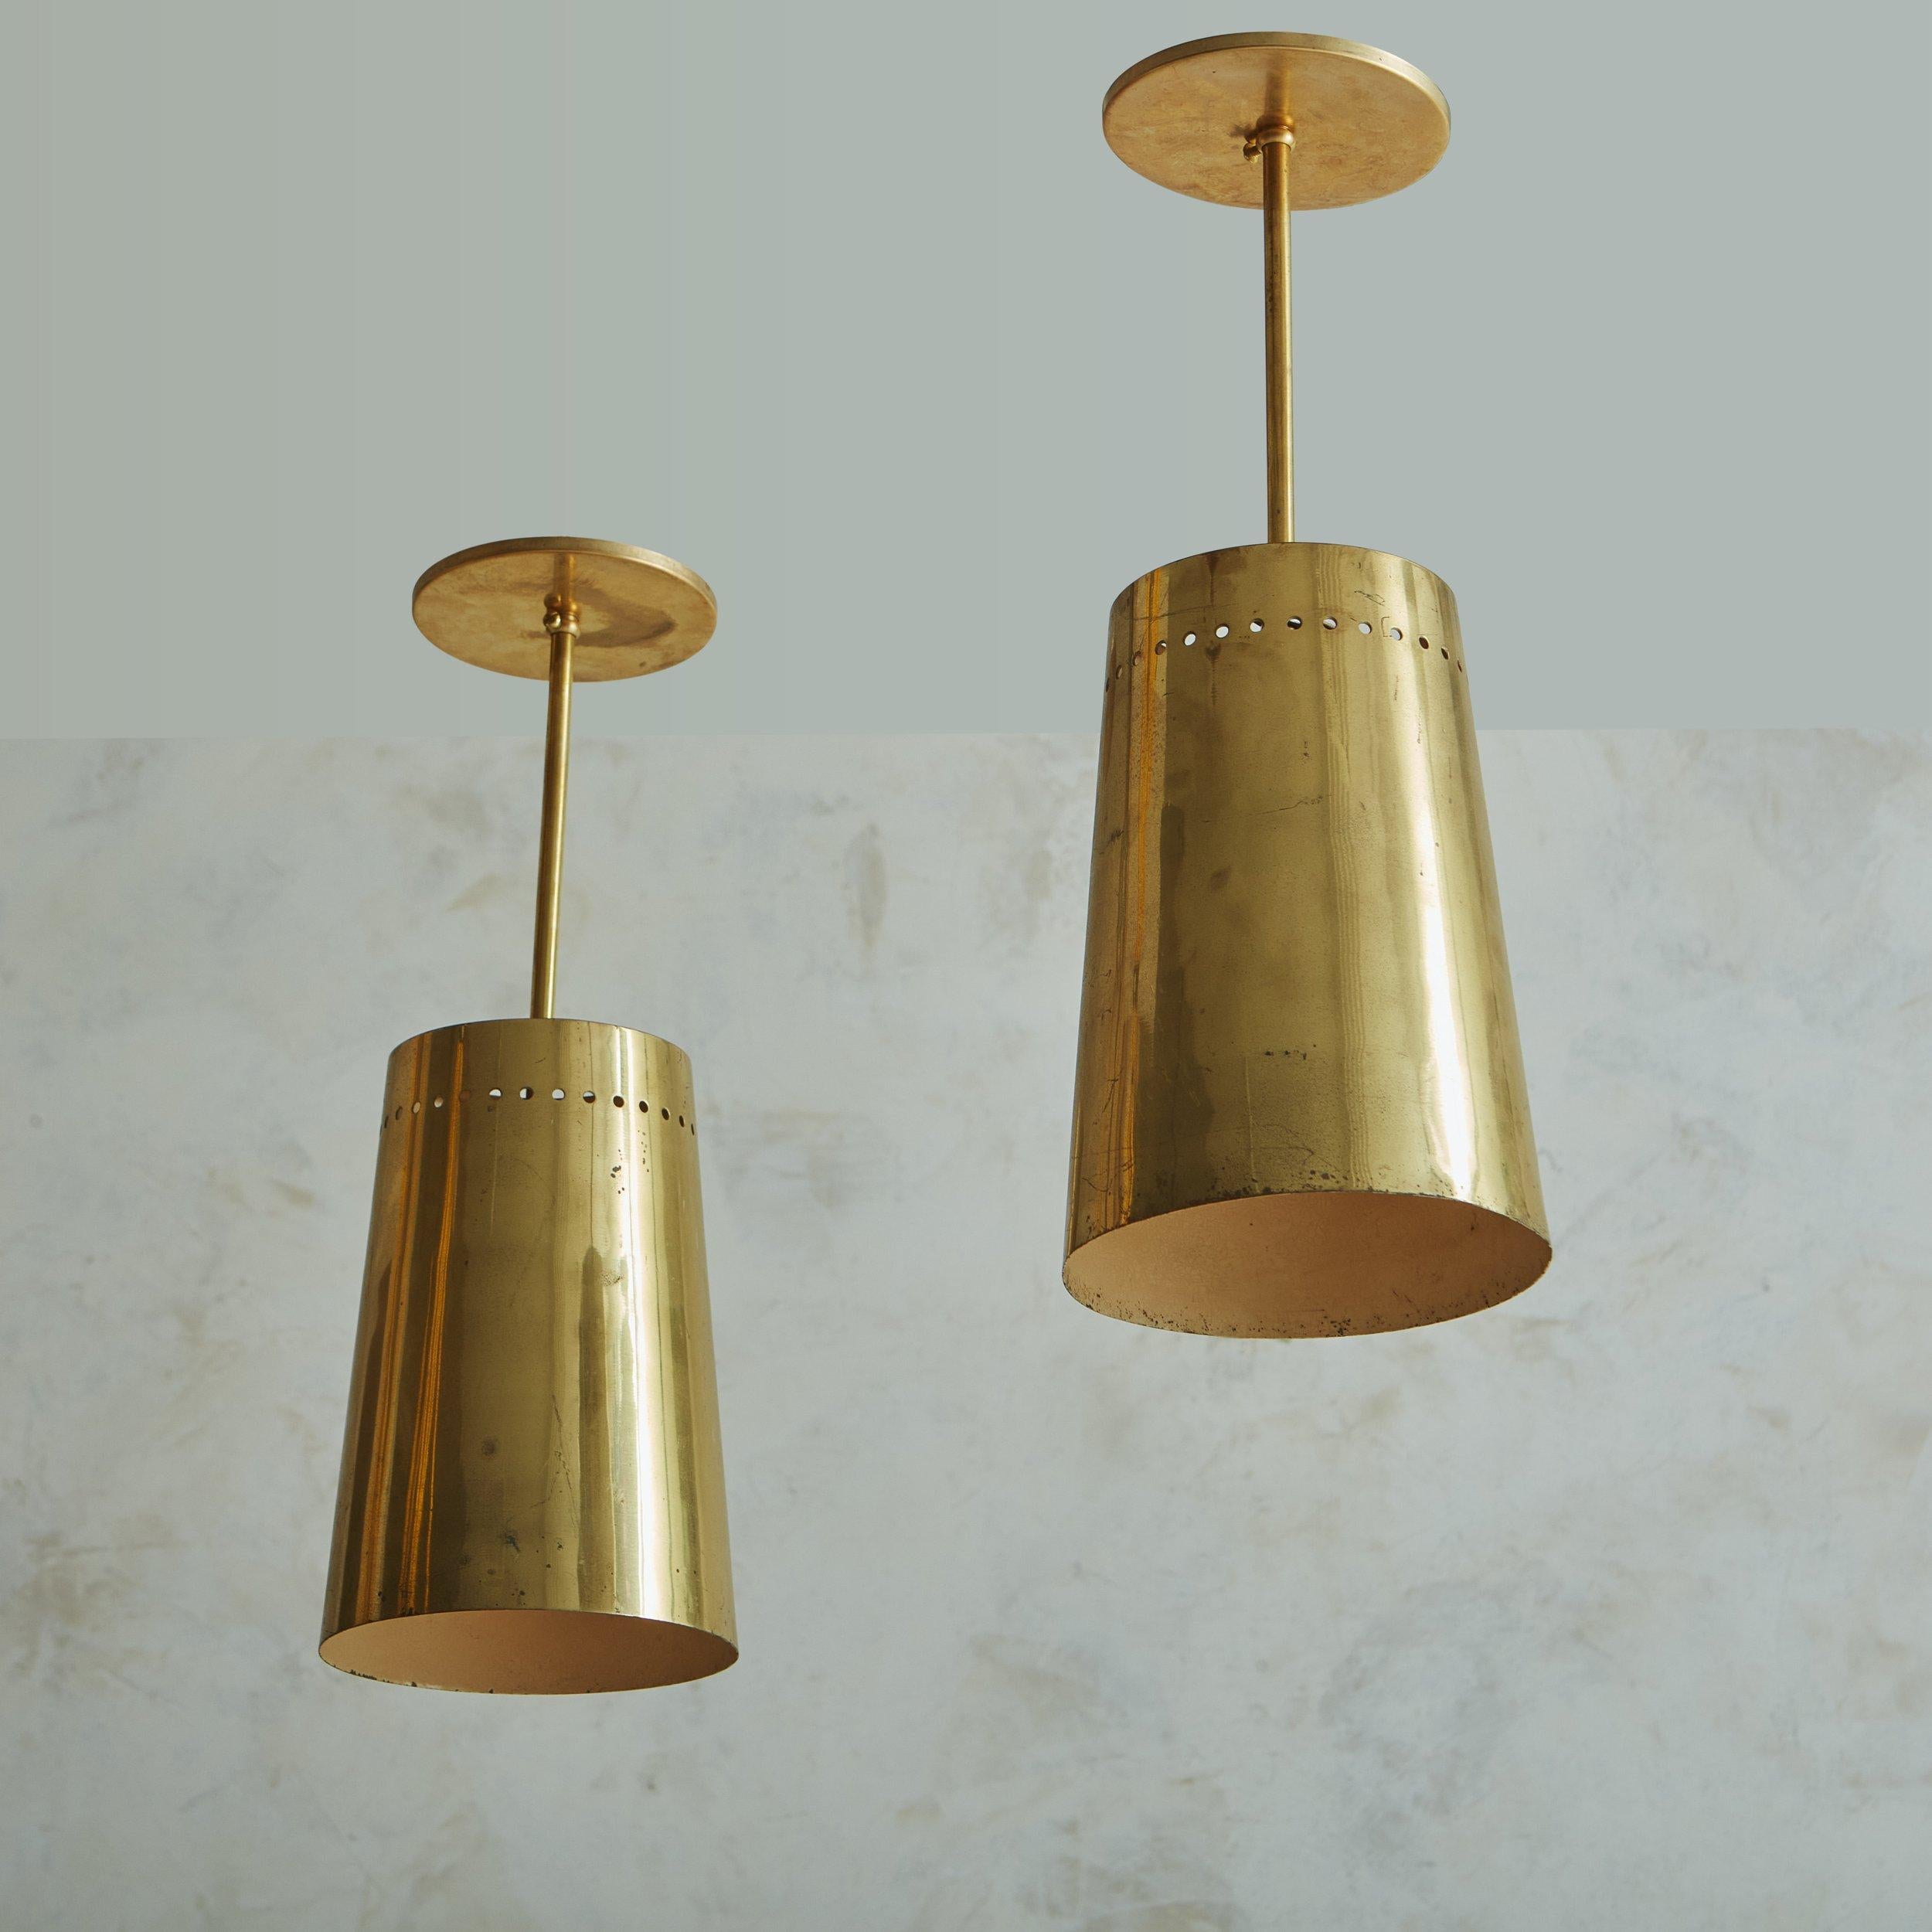 20th Century Vintage Brass Pendant Light with Perforated Trim - 2 Available For Sale